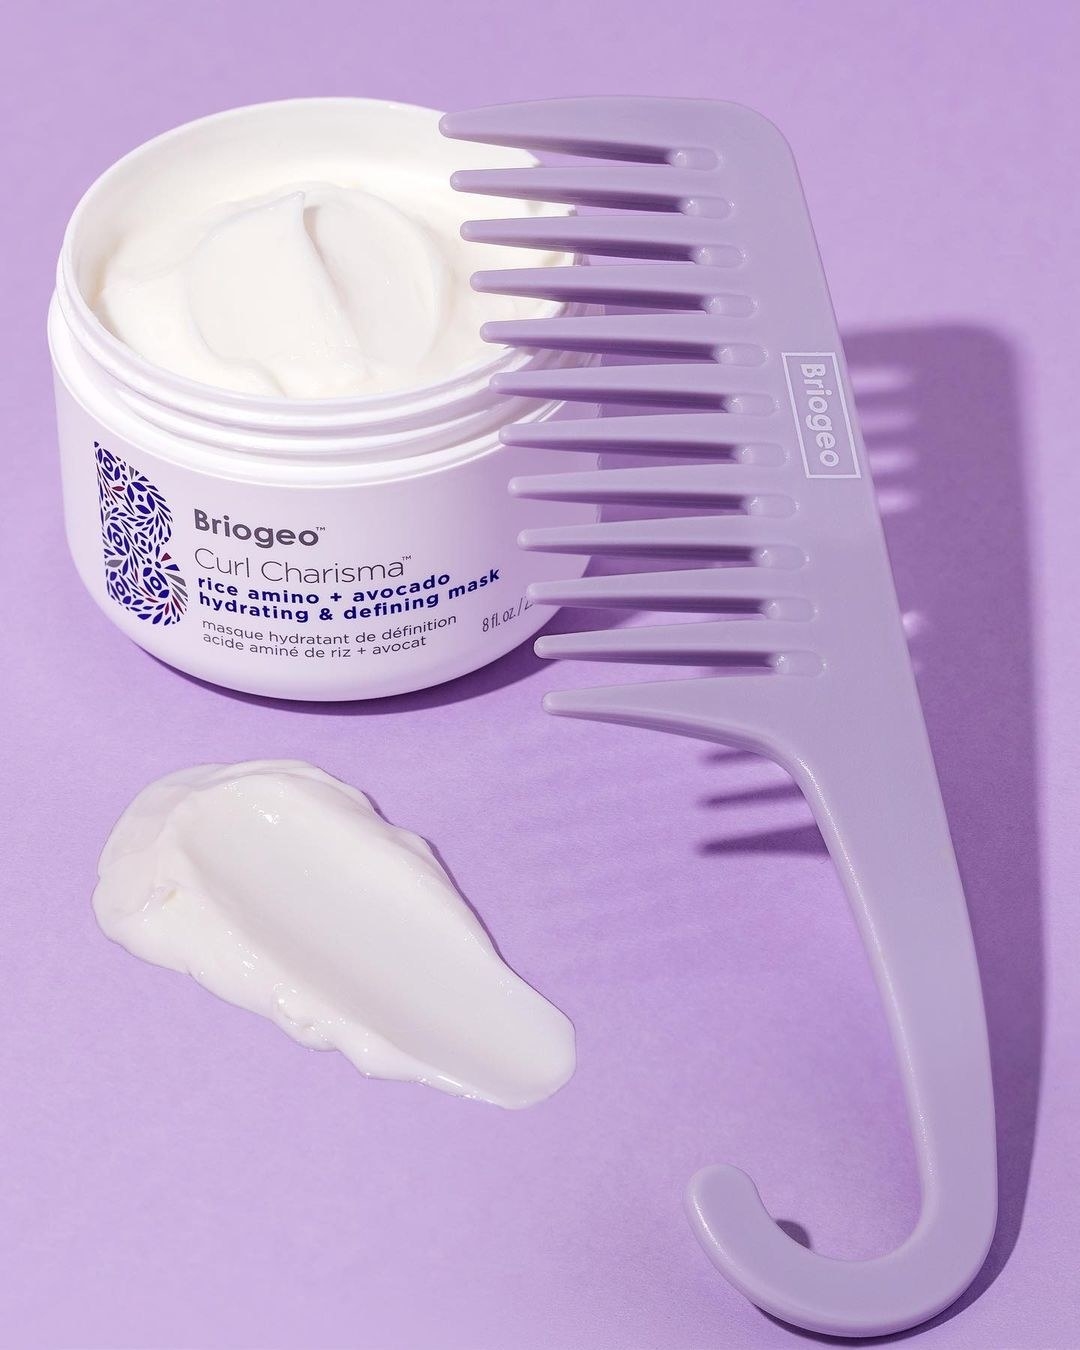 A large wide-tooth comb next to a tub of hair product